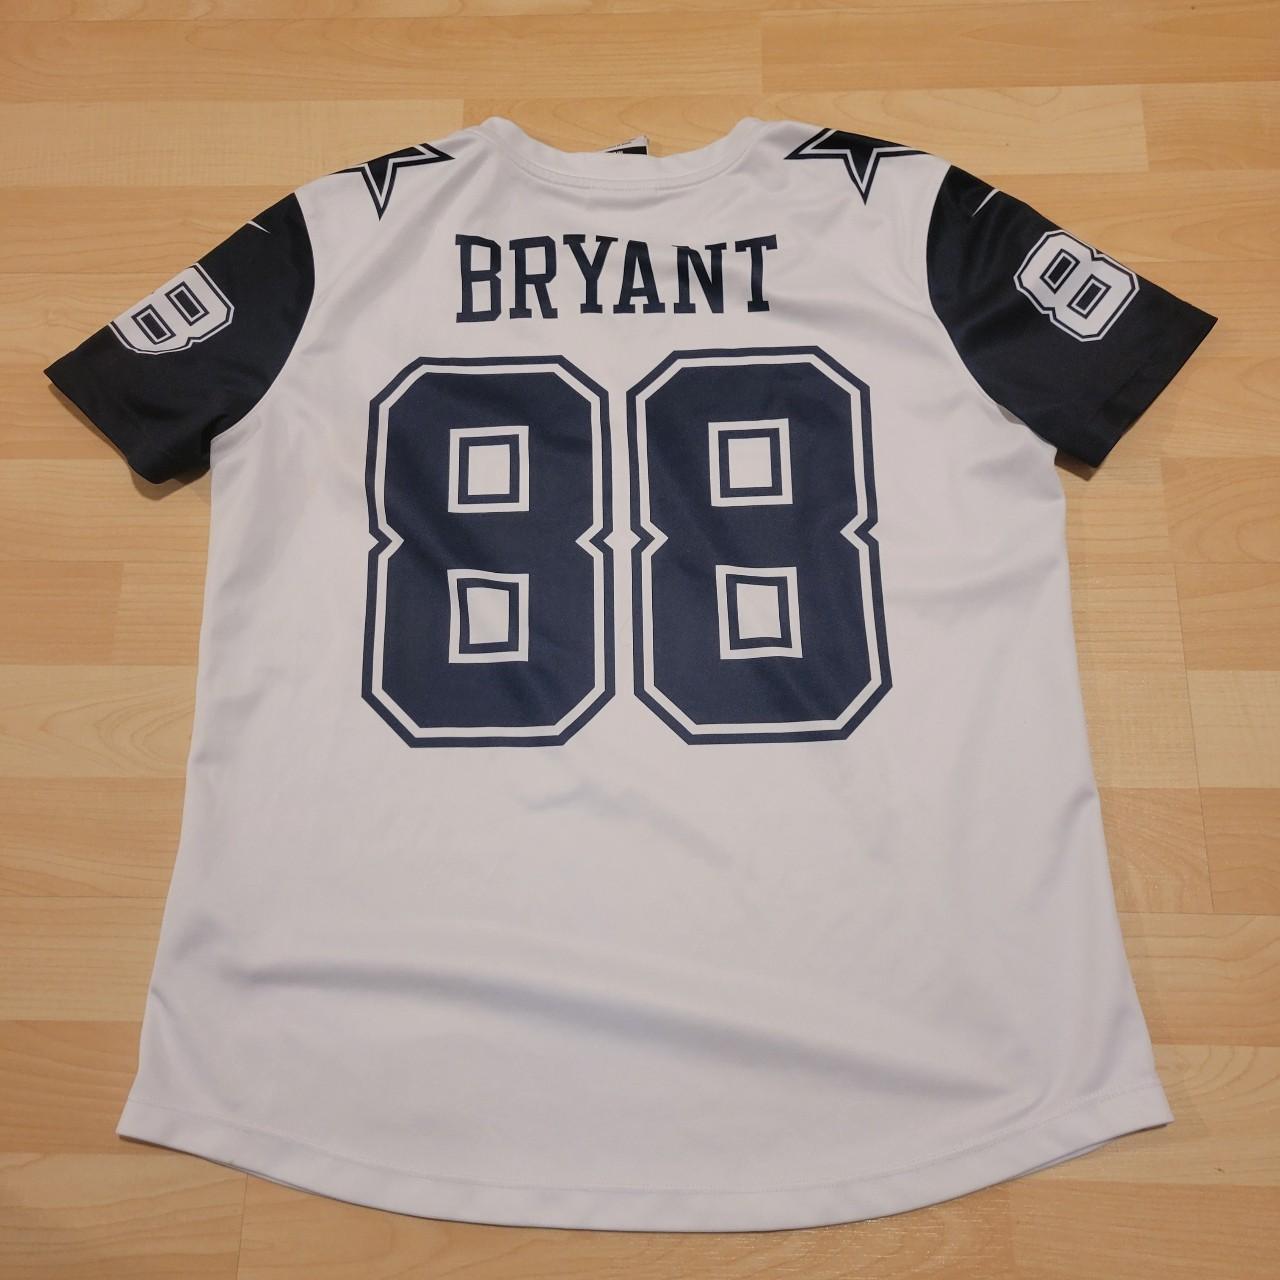 womens dez bryant jersey